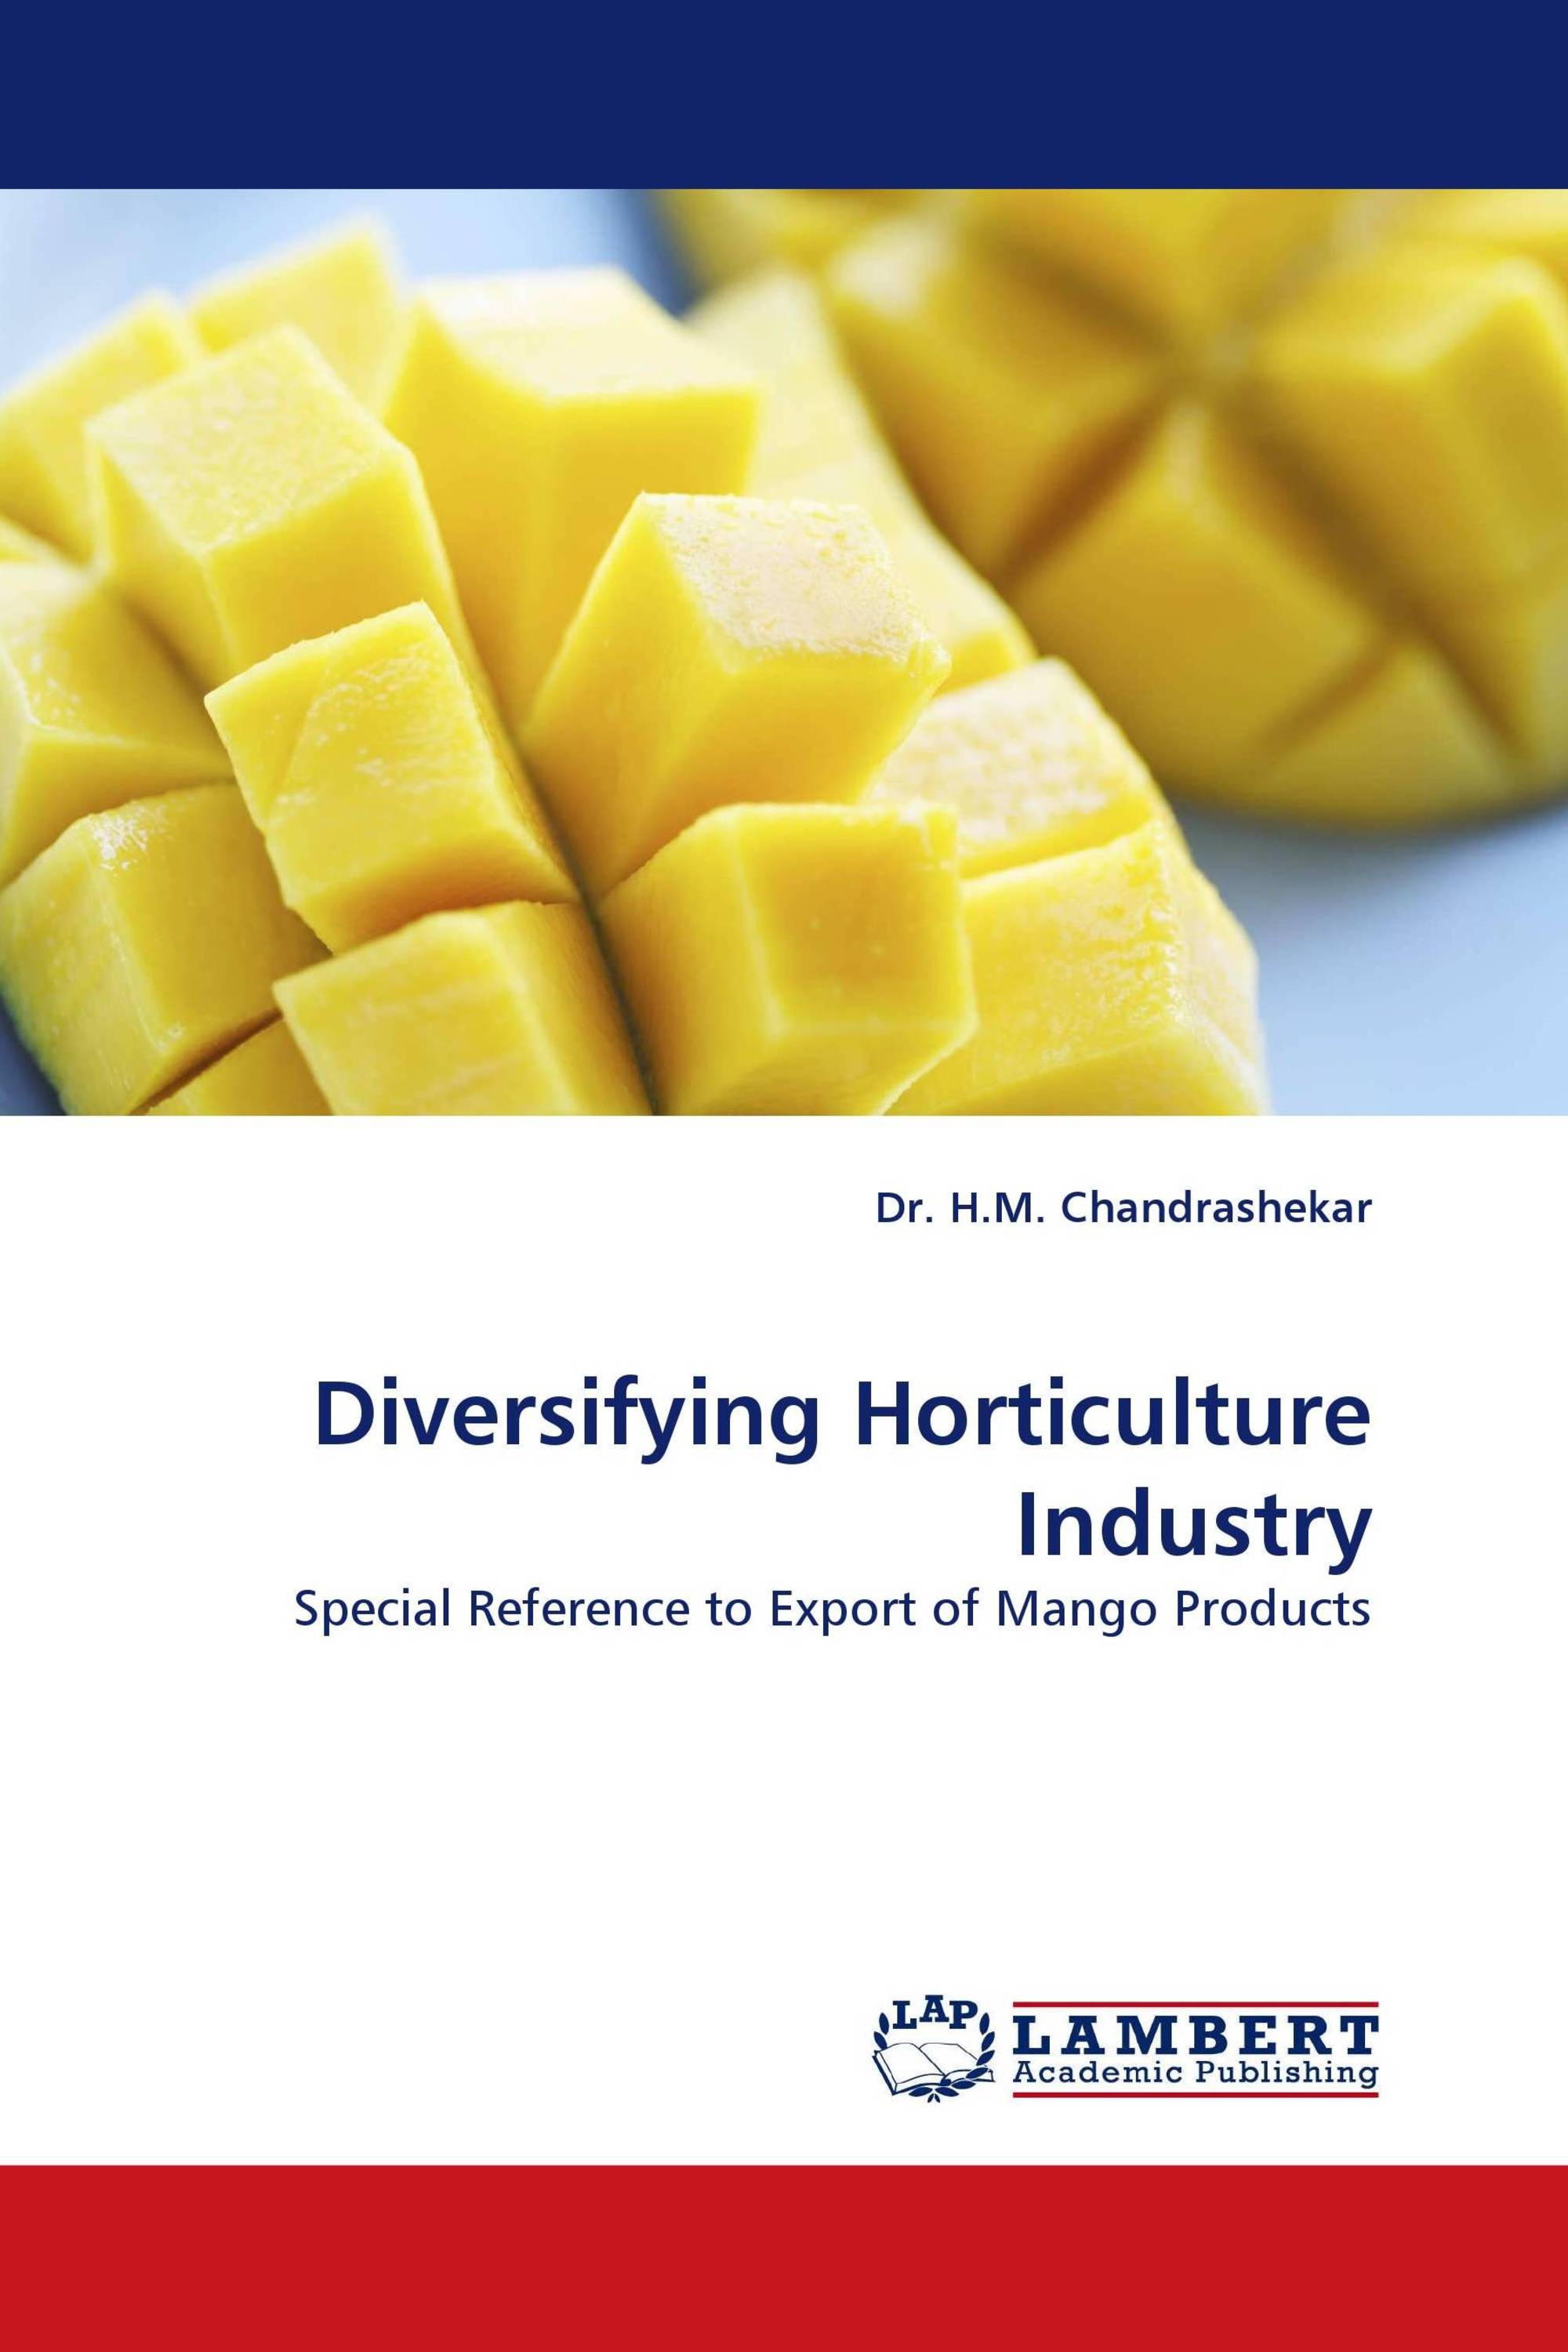 Diversifying Horticulture Industry